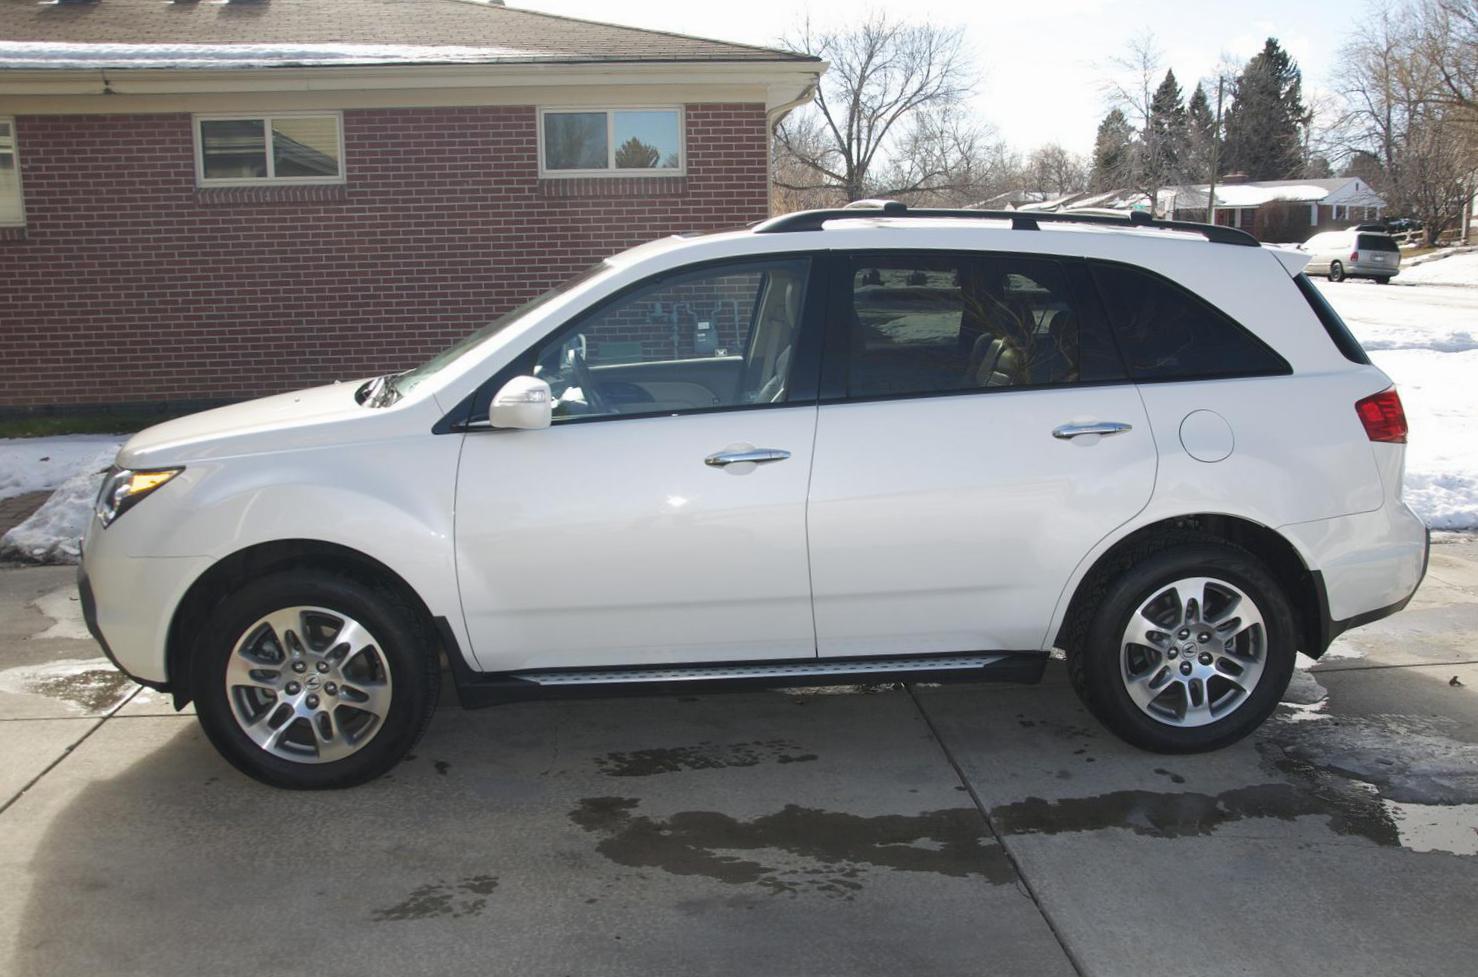 MDX Acura approved suv